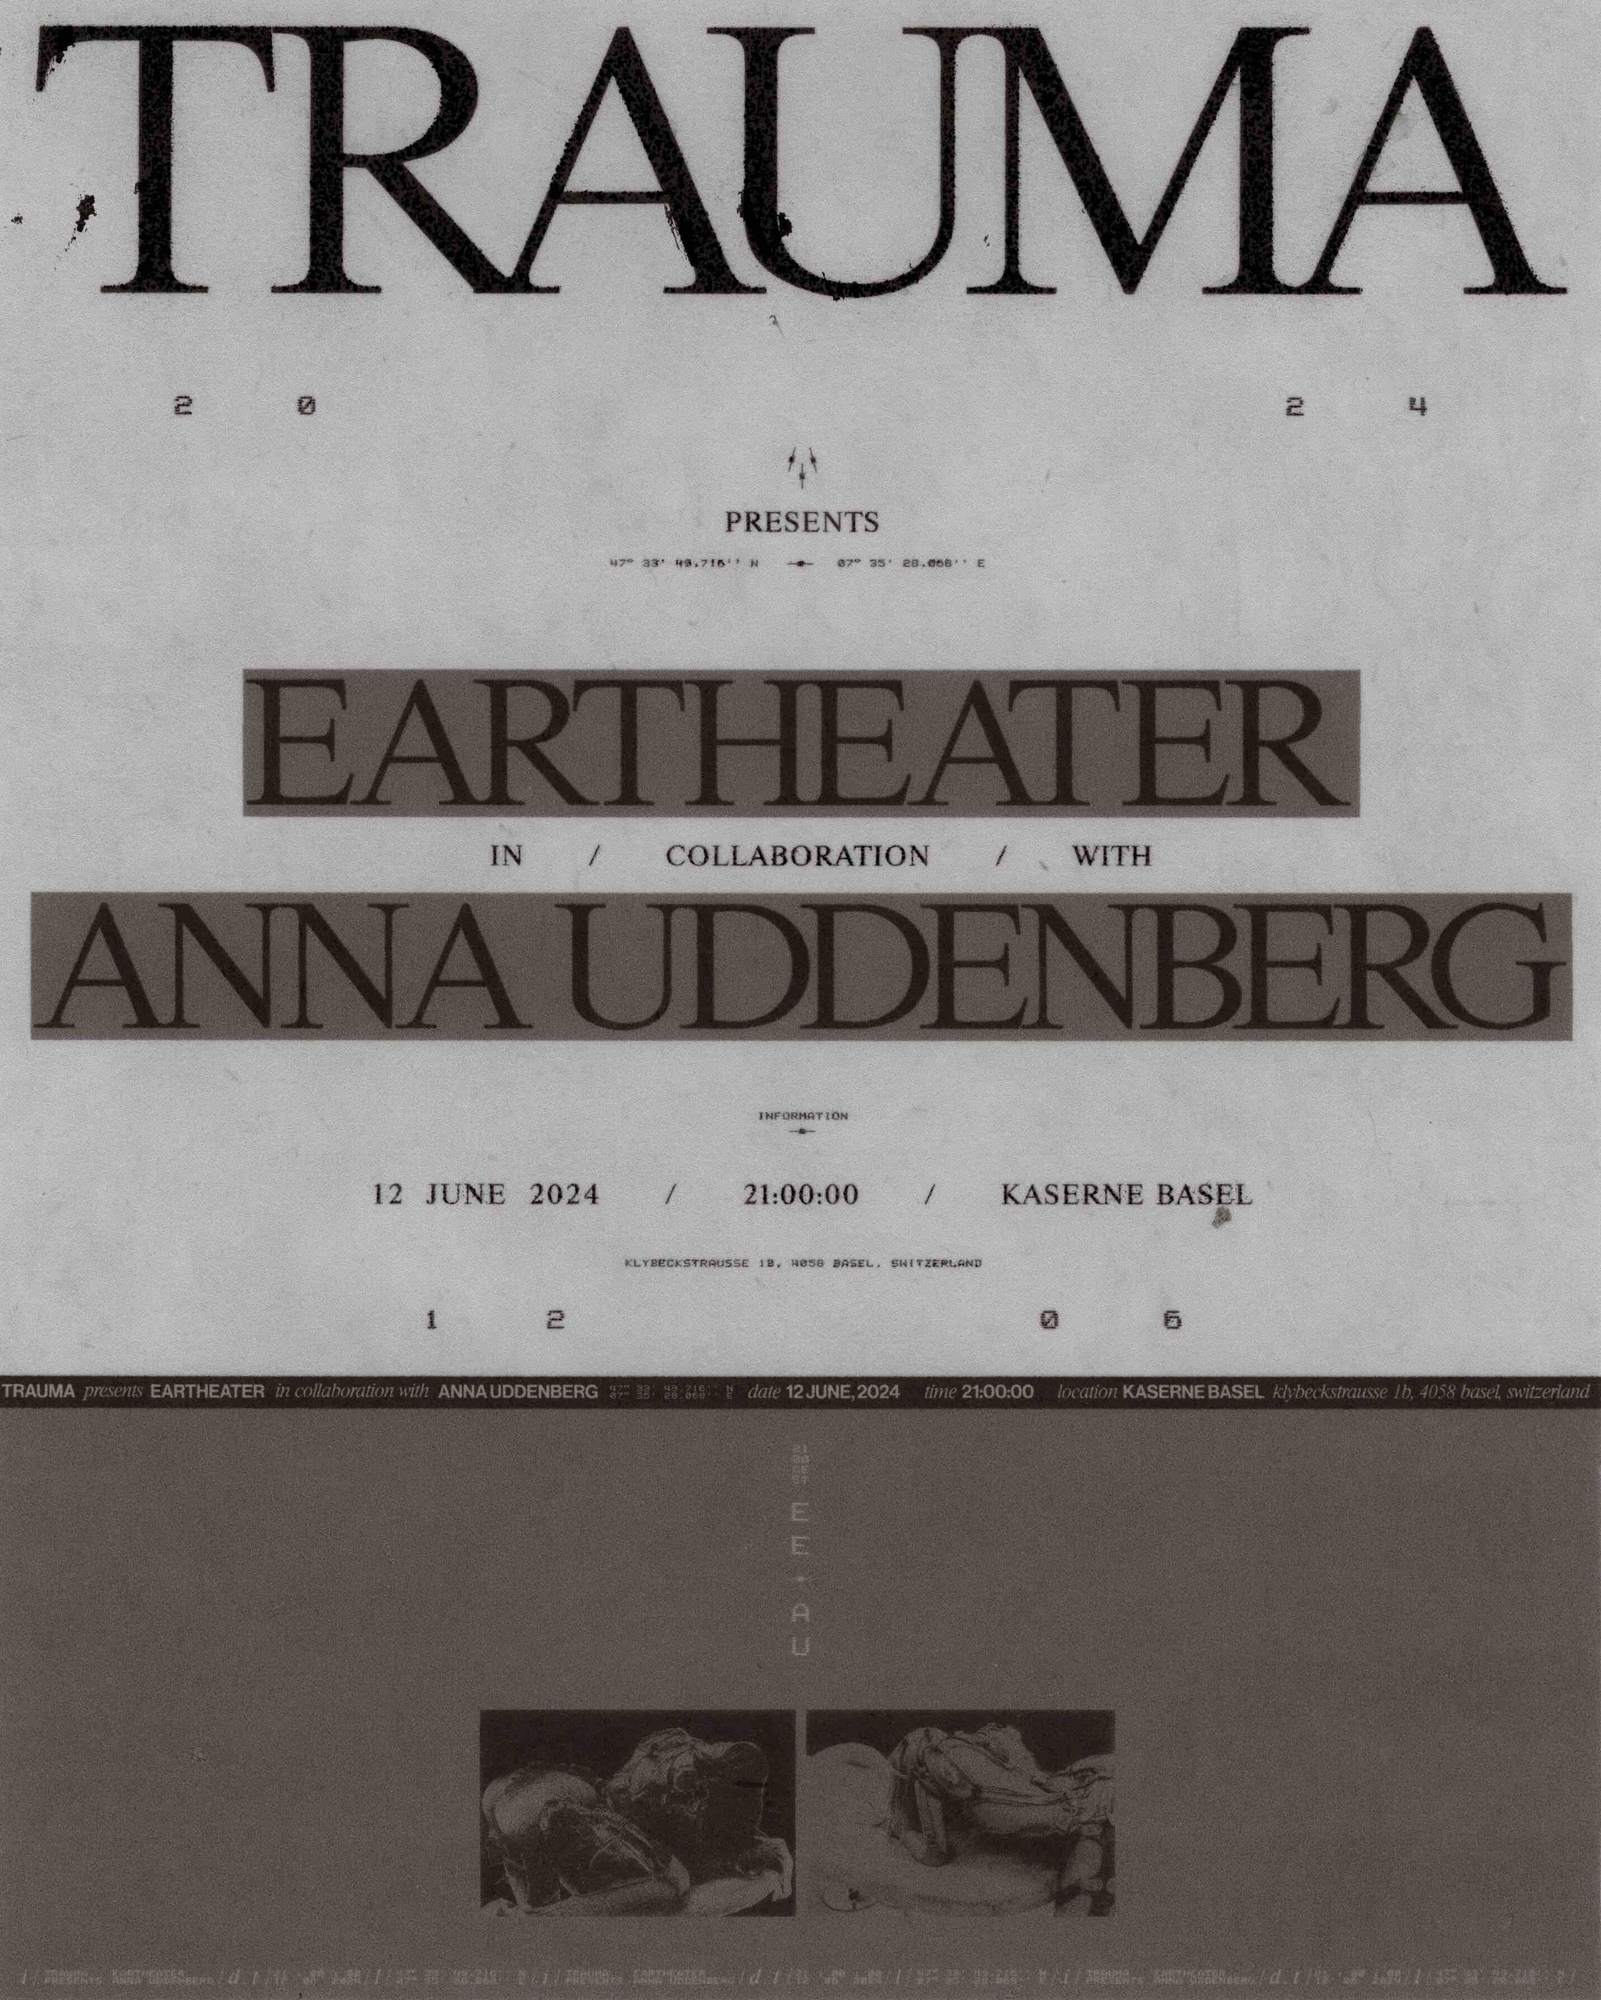 Eartheater in collaboration with Anna Uddenberg - Página frontal